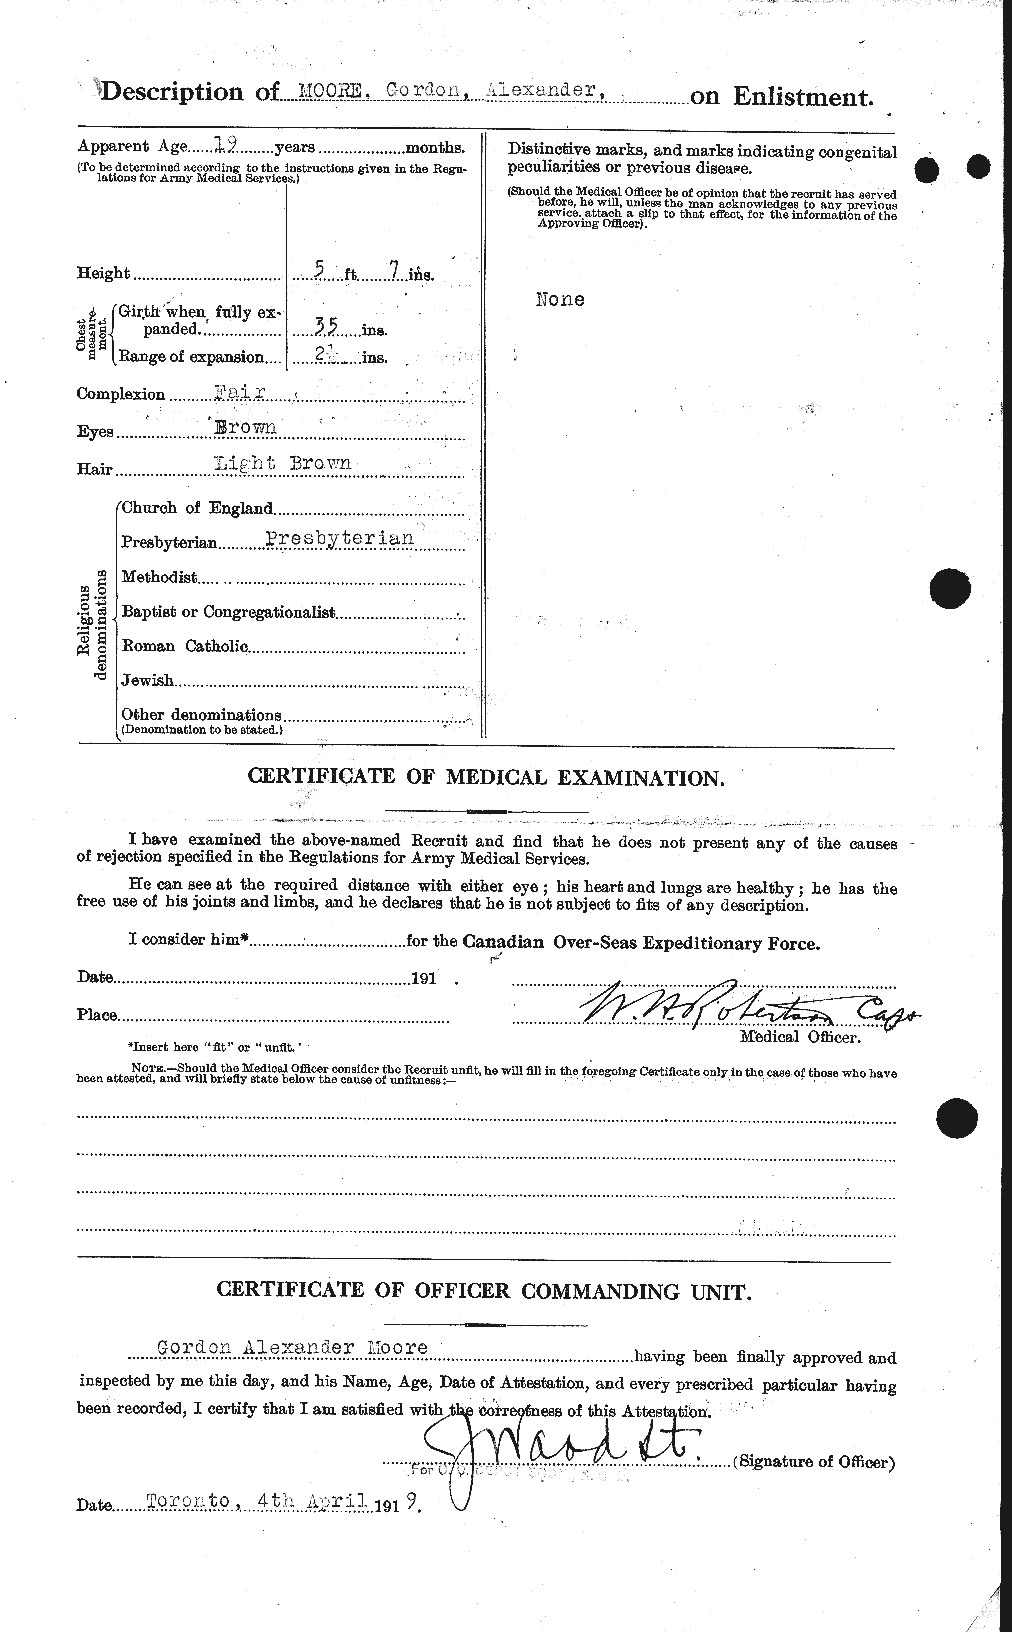 Personnel Records of the First World War - CEF 502044b